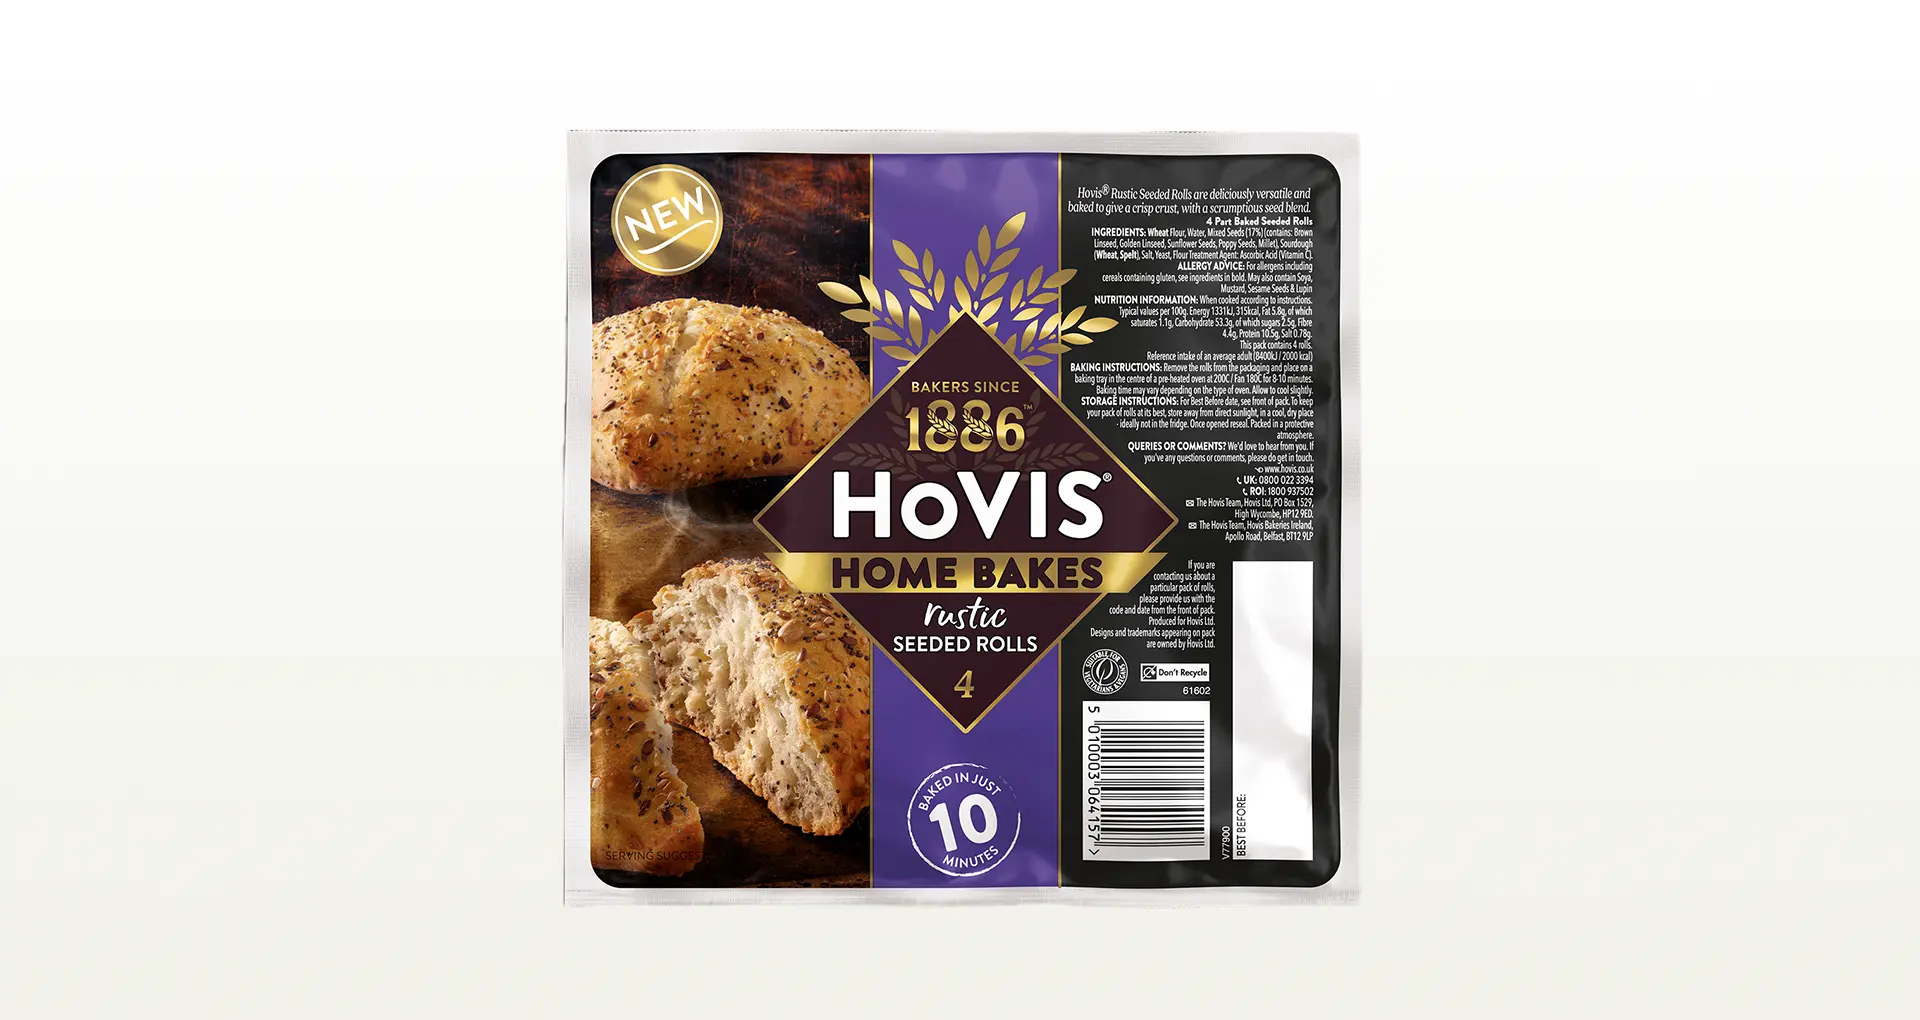 Hovis Home Bakes Rustic Seeded Rolls